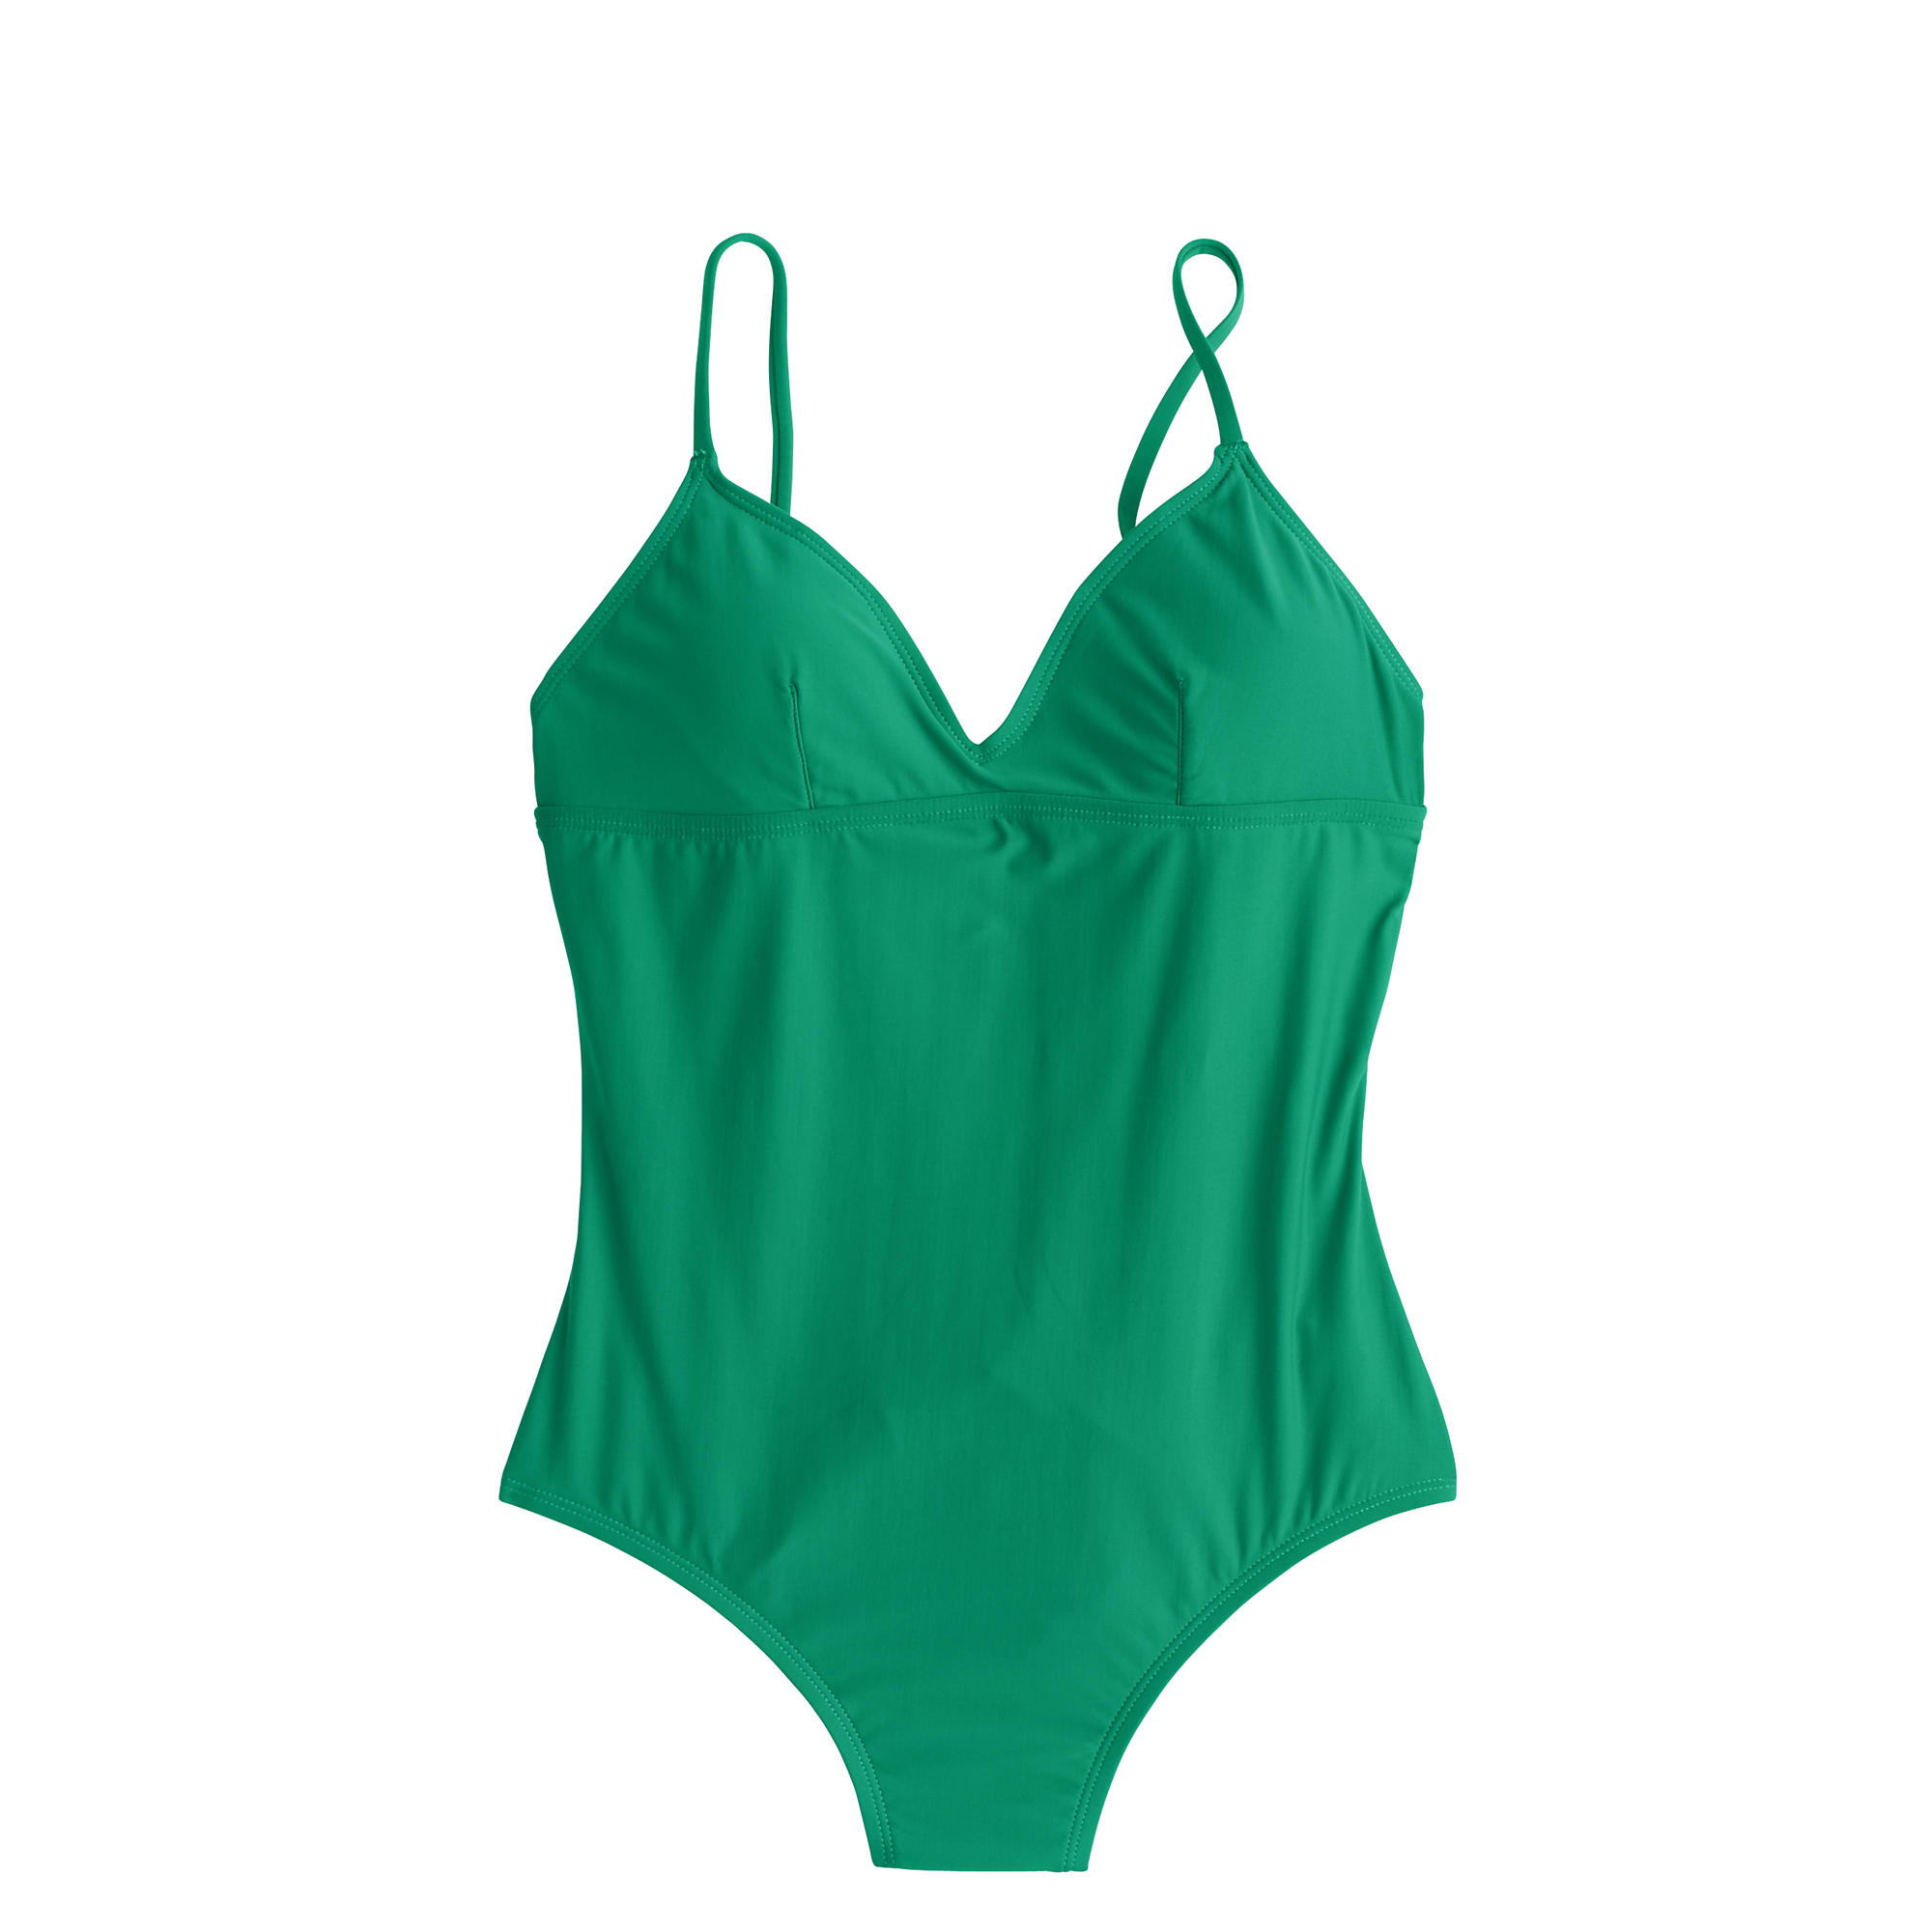 Lyst - J.Crew V-neck One-piece Swimsuit in Green